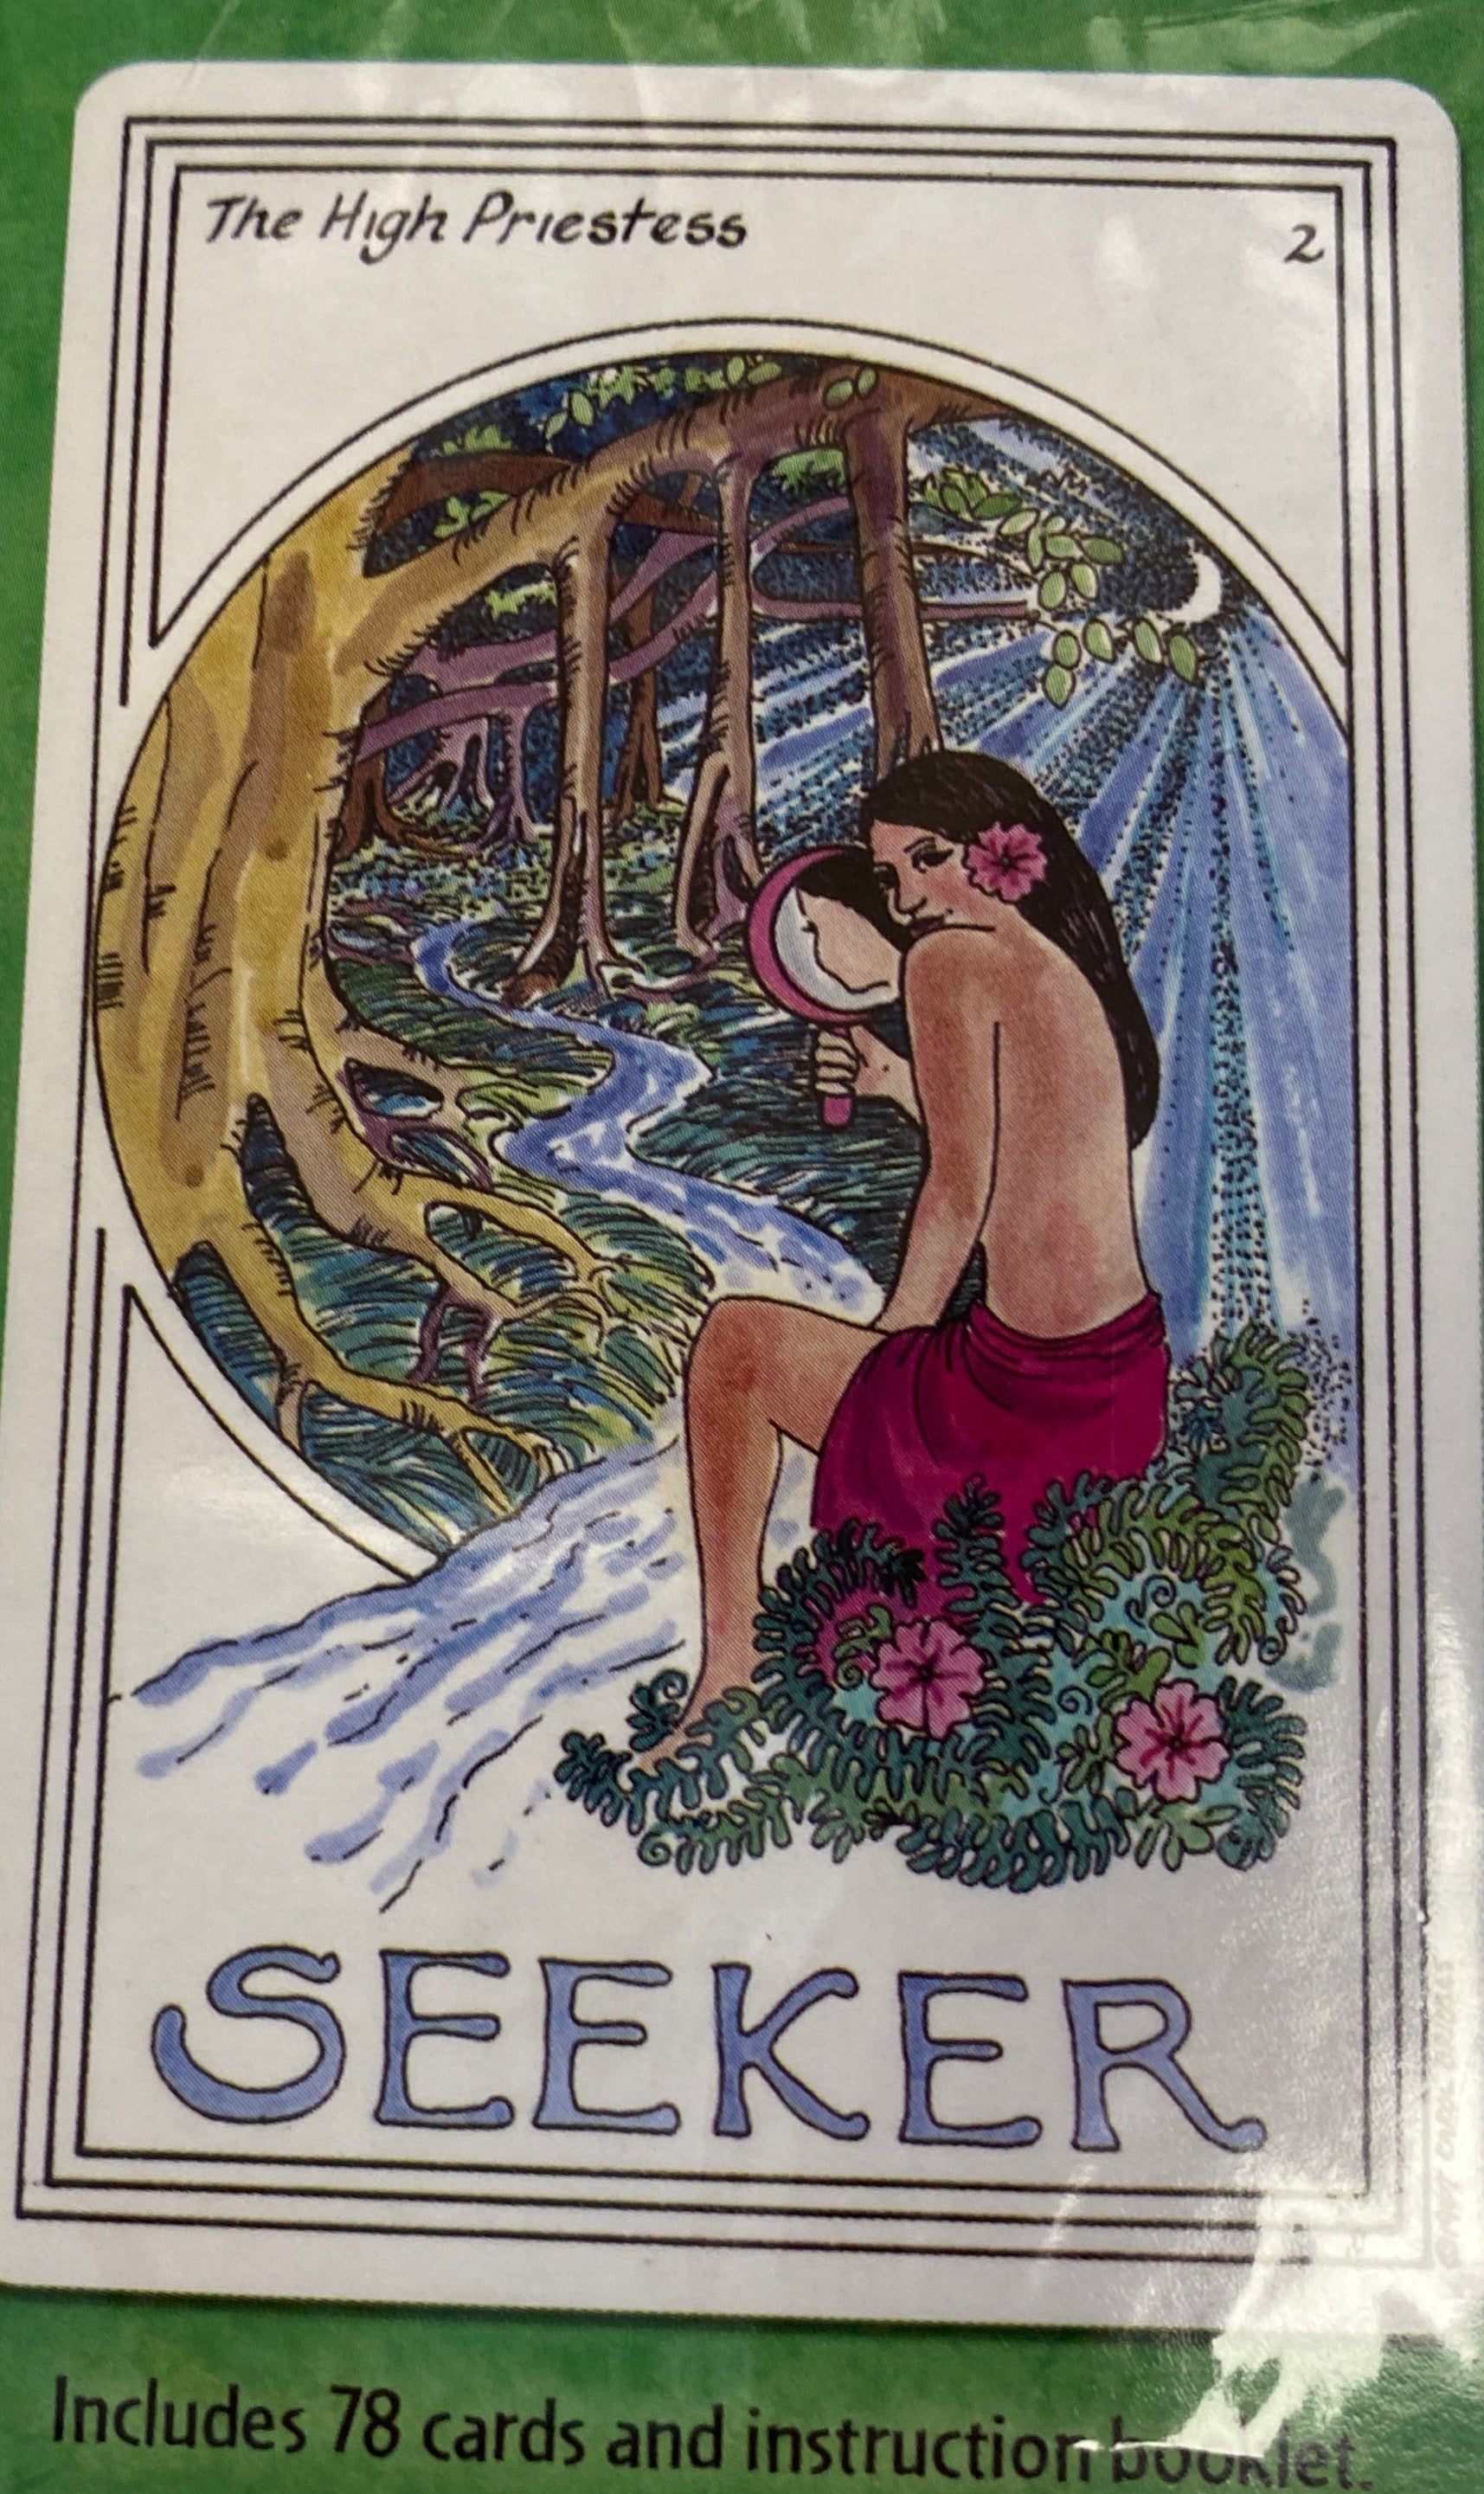 Back of box in gree with image of woman near a stream 